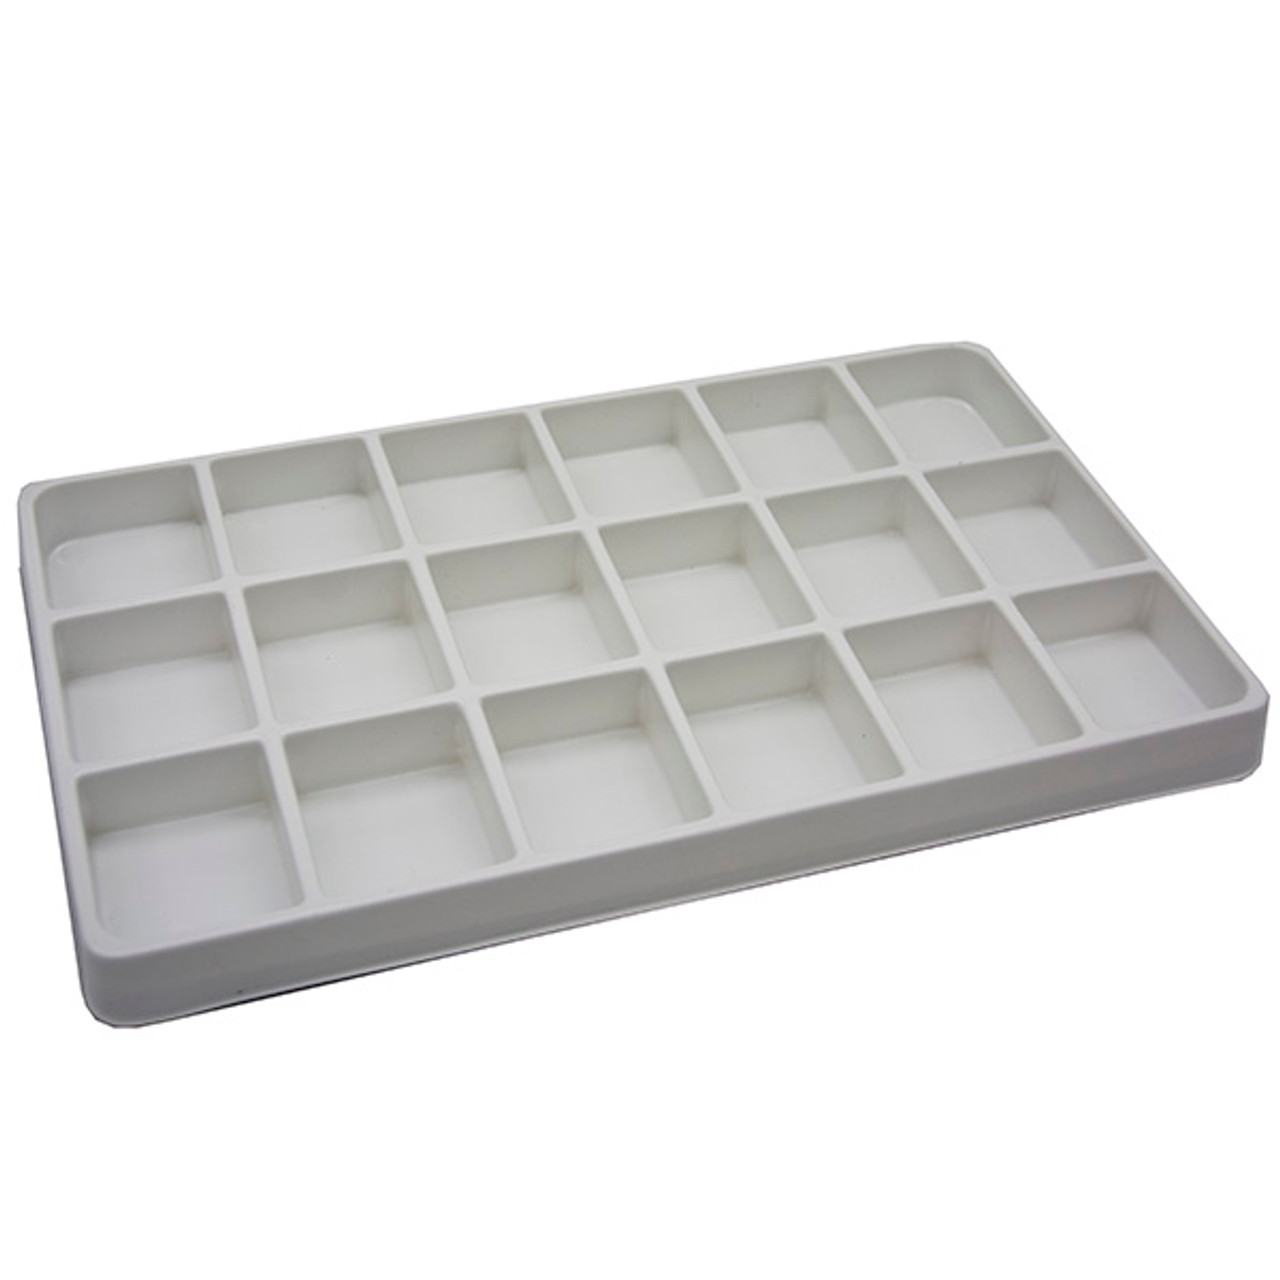 Stackable Plastic Tray 18 compartment - PC18